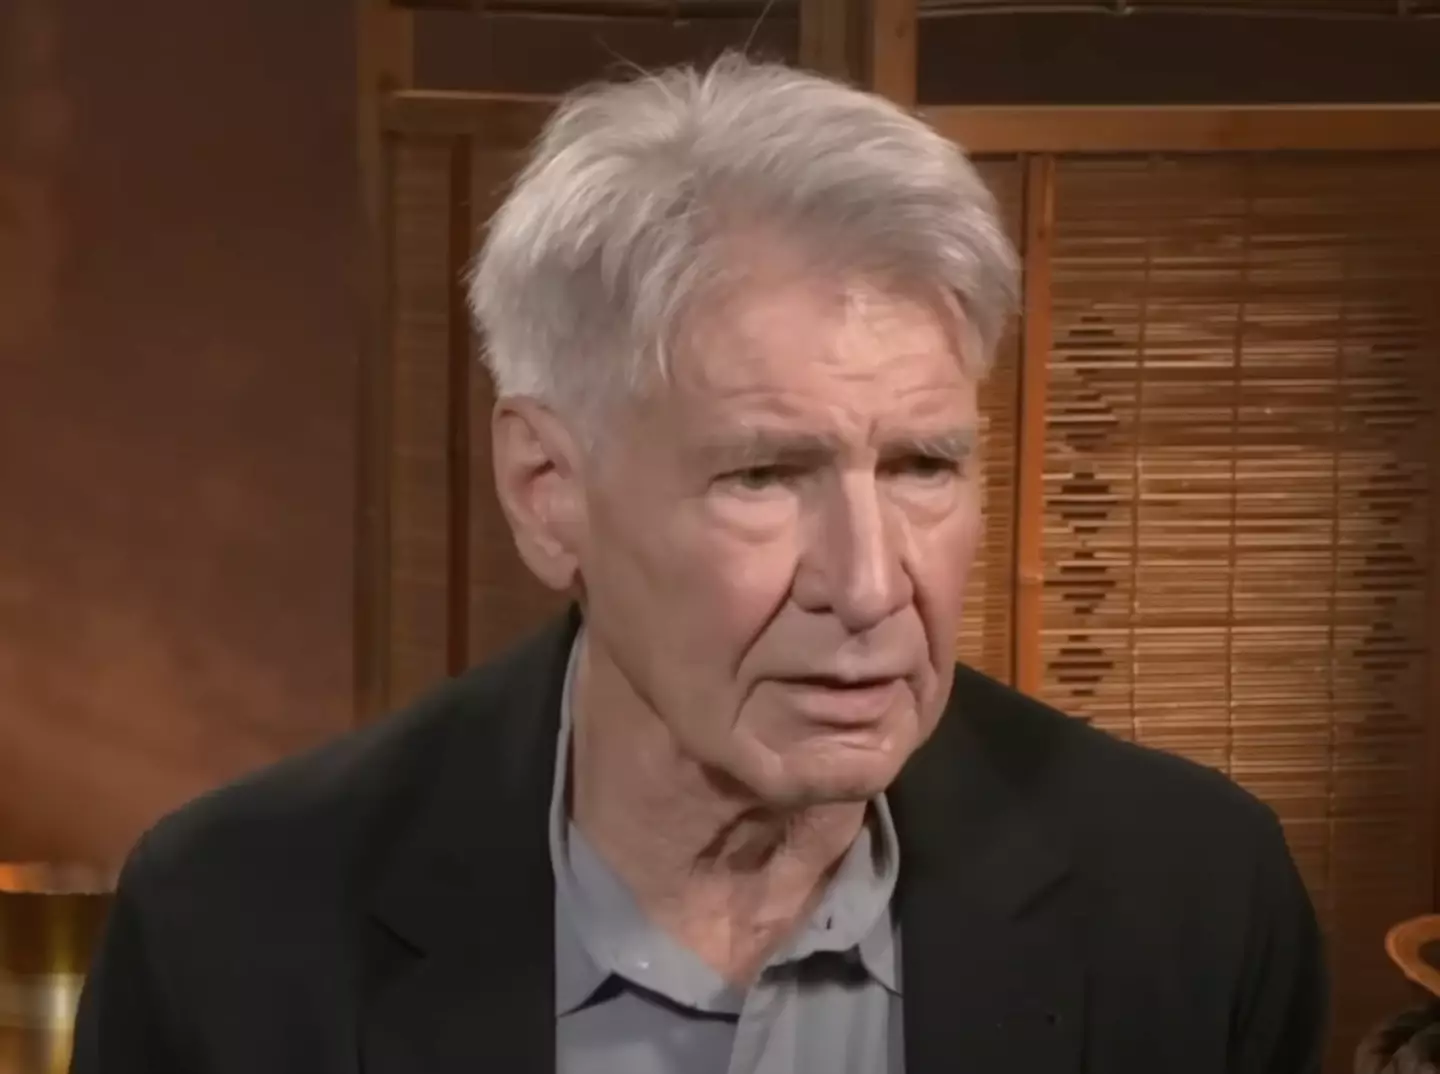 Harrison Ford is set to play Thaddeus Ross in the MCU.